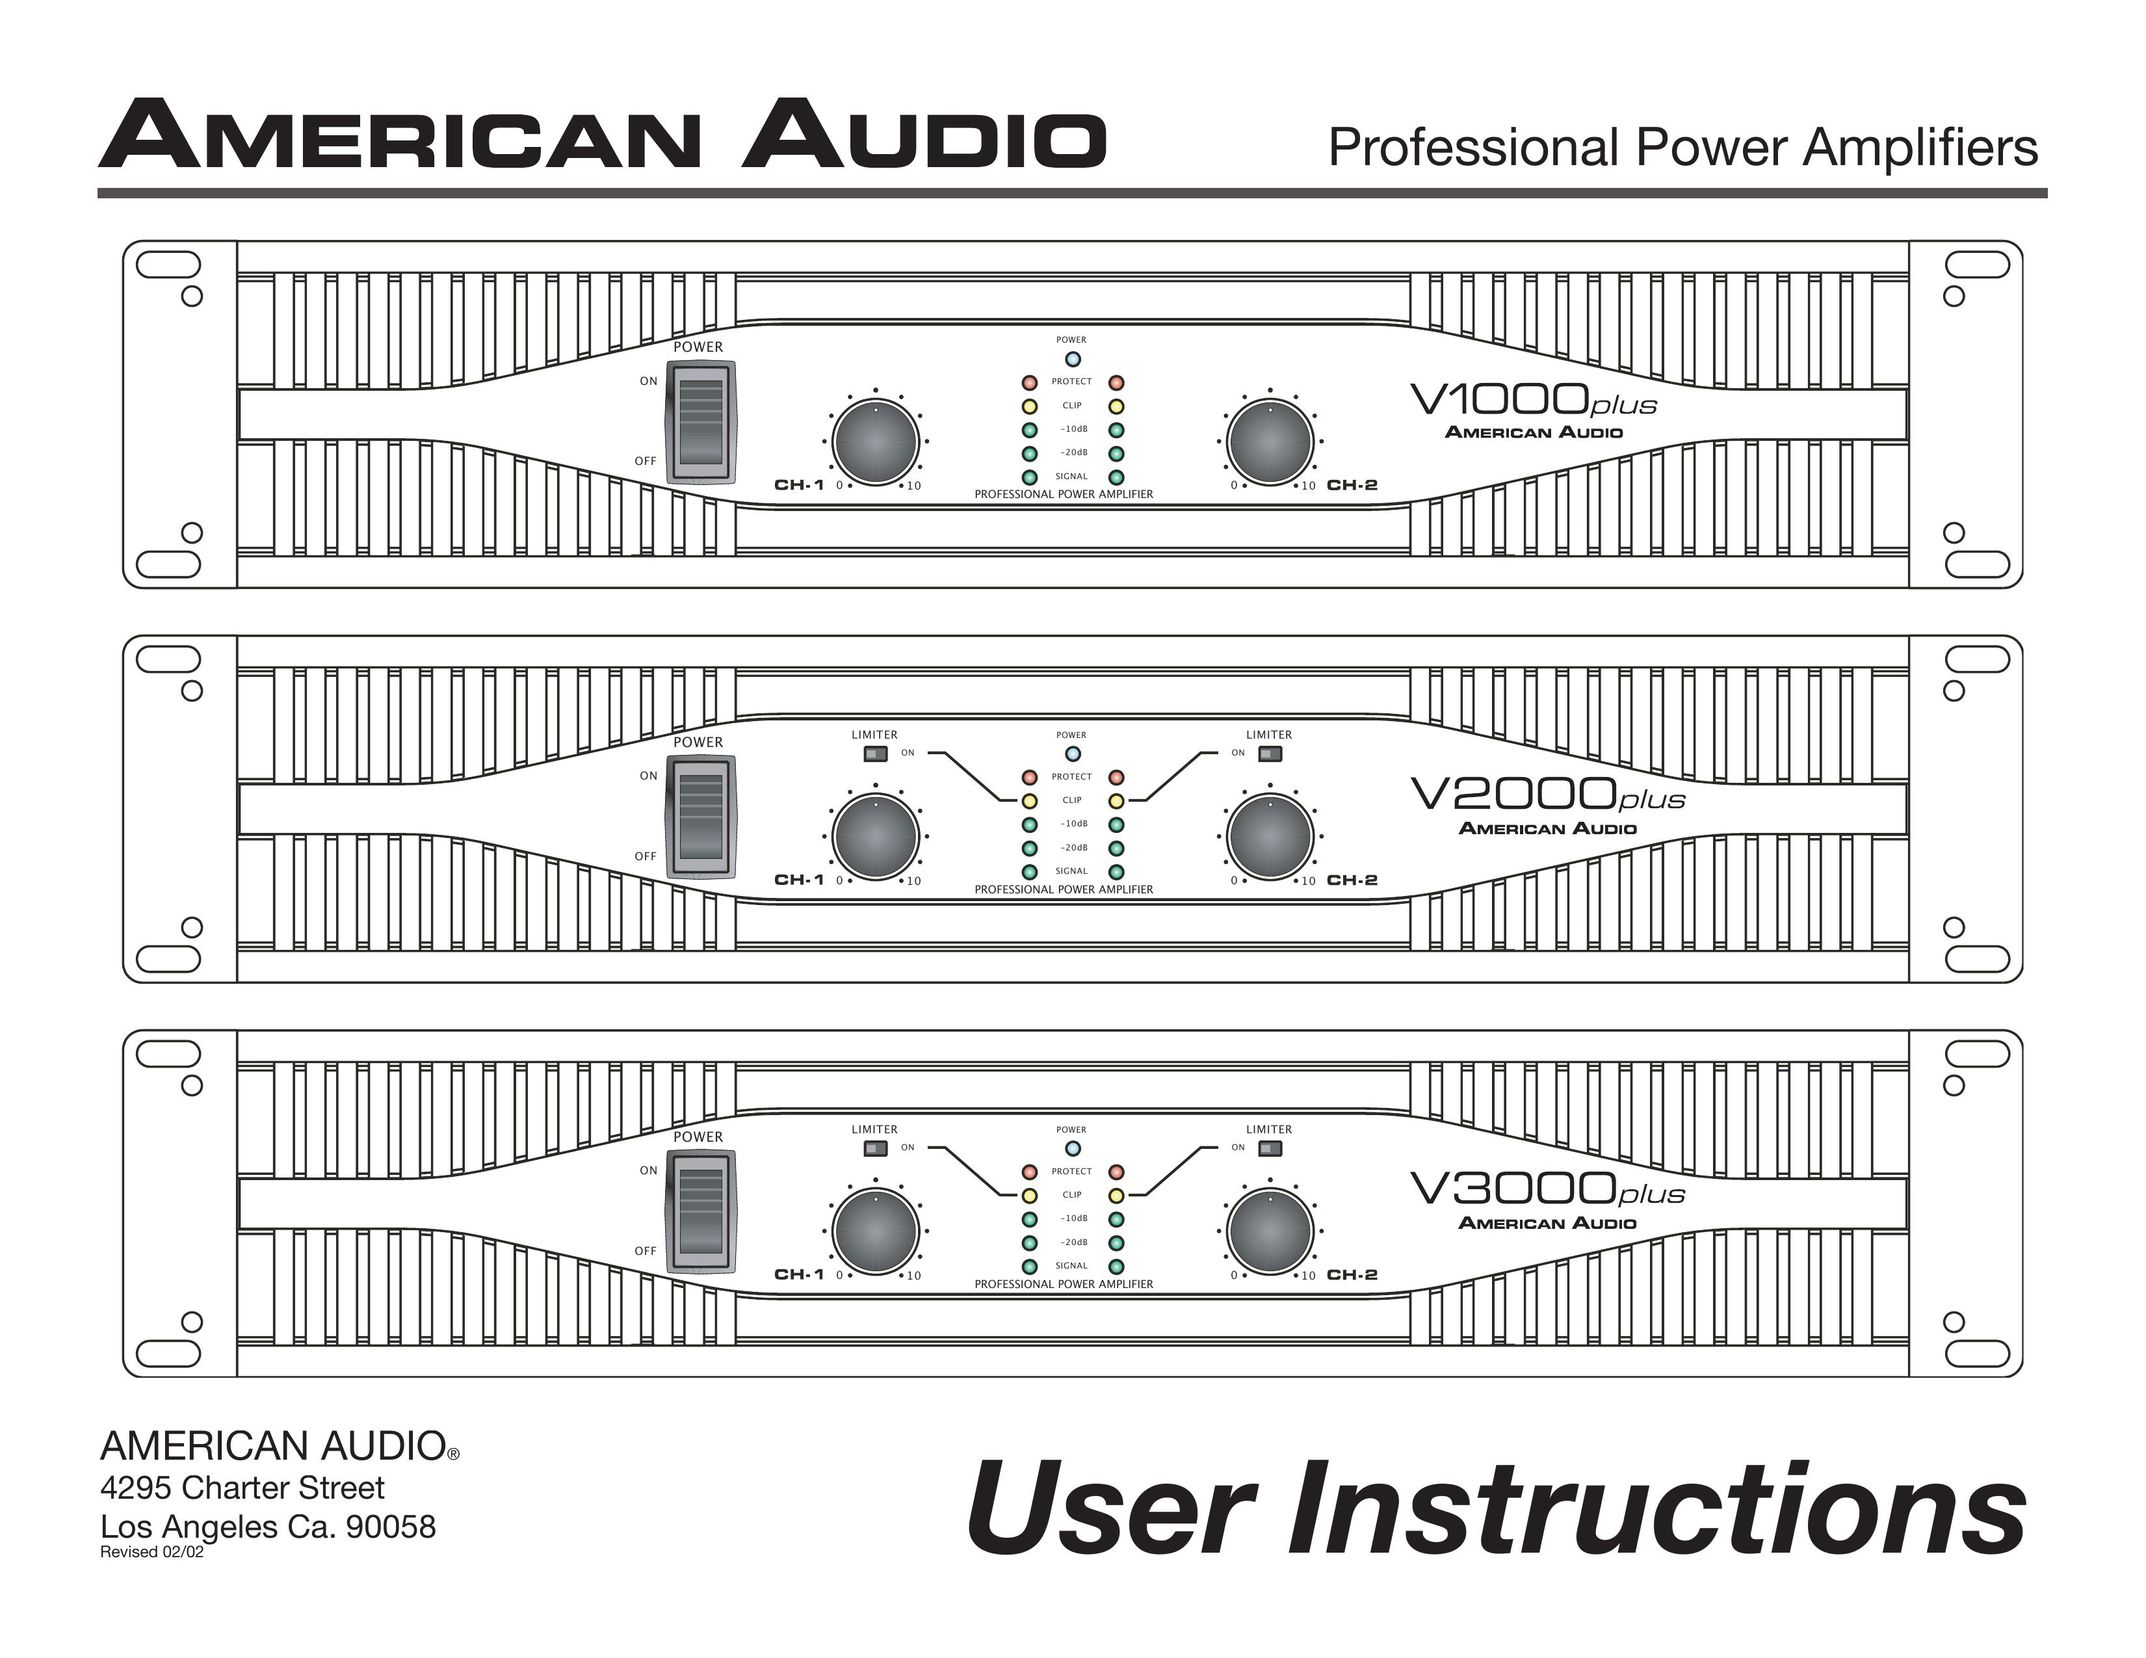 American Audio Professional Power Amplifier Stereo Amplifier User Manual